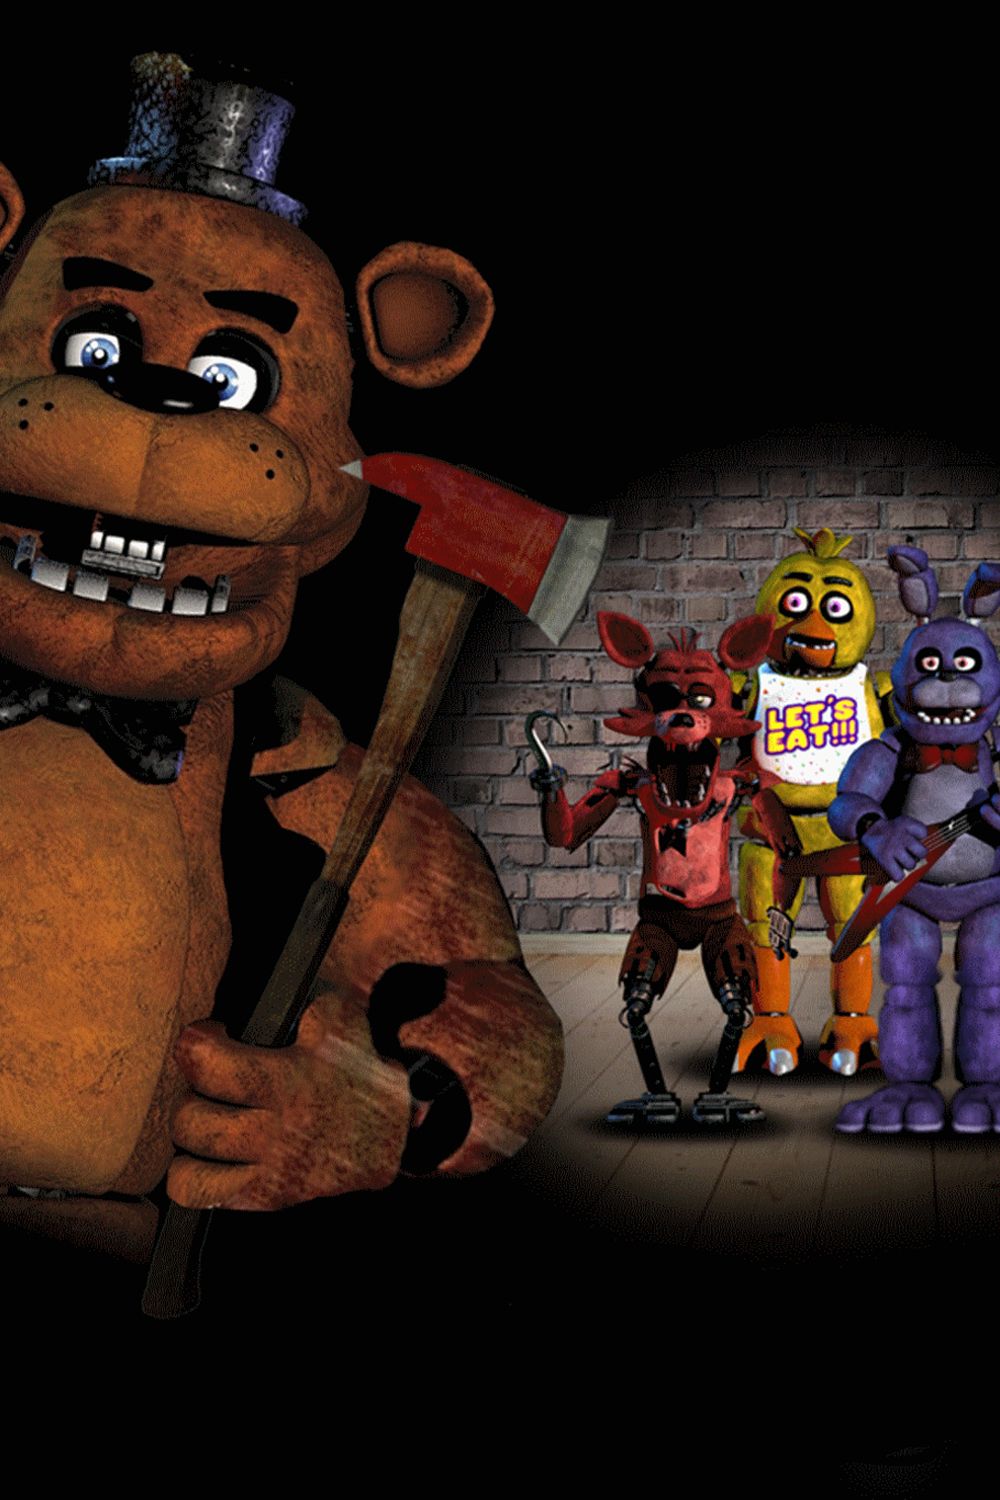 Five Nights At Freddy's' Ending Explained: Why We Think Matthew